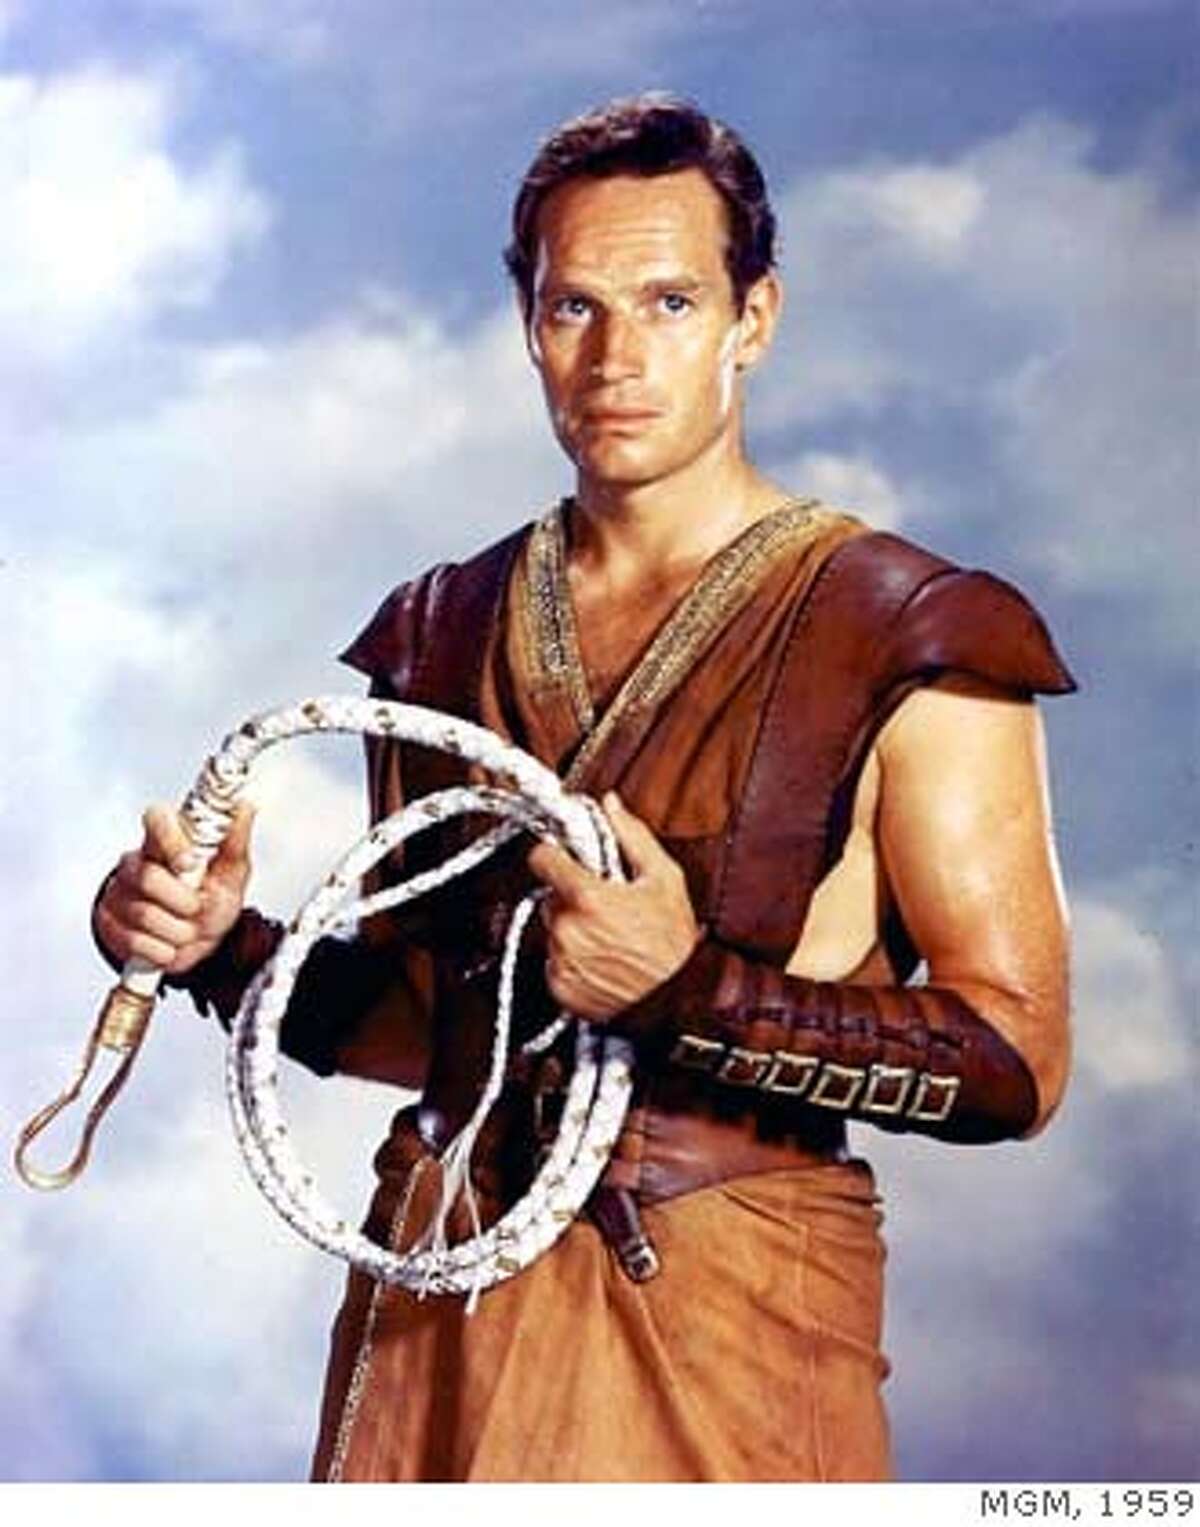 (NYT7) UNDATED -- April 6, 2008 -- OBIT-HESTON-7 -- Charton Heston in the title role in "Ben-Hur." Heston, who appeared in some 100 films in his 60-year acting career but who is remembered chiefly for his monumental, jut-jawed portrayals of Moses, Ben-Hur and Michelangelo, died Saturday night, April 5, 2008, at his home in Beverly Hills, Calif. He was 84, according to his family. (MGM via The New York Times) EDITORIAL USE ONLY - MAGS OUT/NO SALES - FOR USE ONLY WITH STORY SLUGGED: OBIT-HESTON BY ROBERT BERKVIST - ALL OTHER USE PROHIBITED